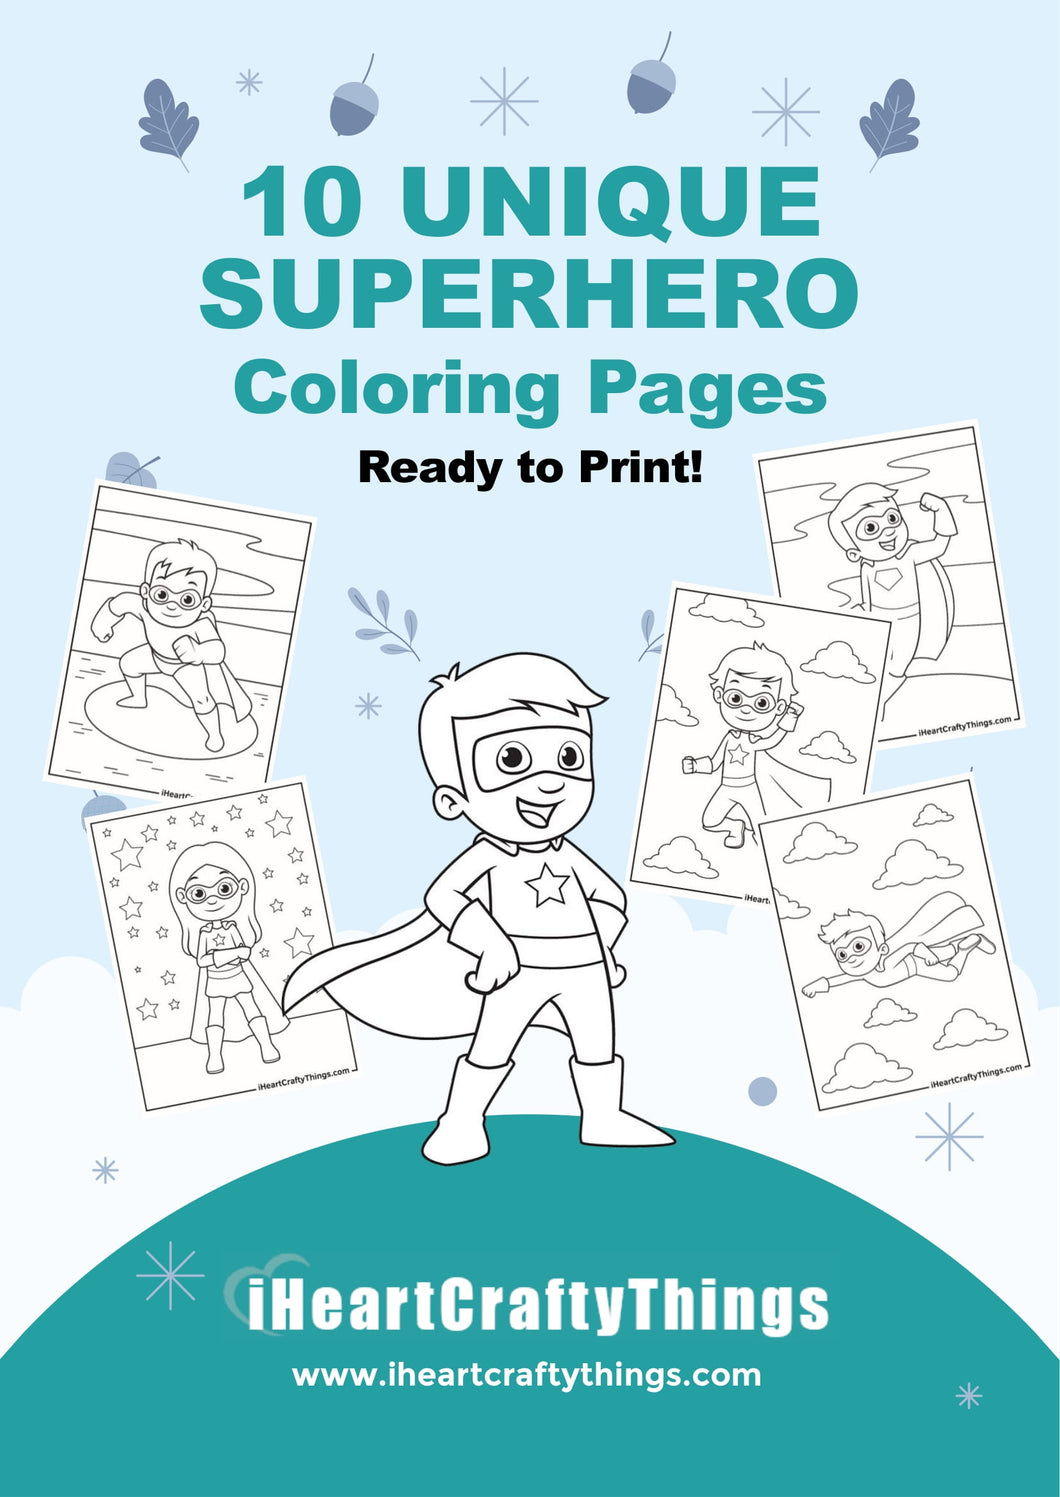 10 SUPER HERO COLORING PAGES